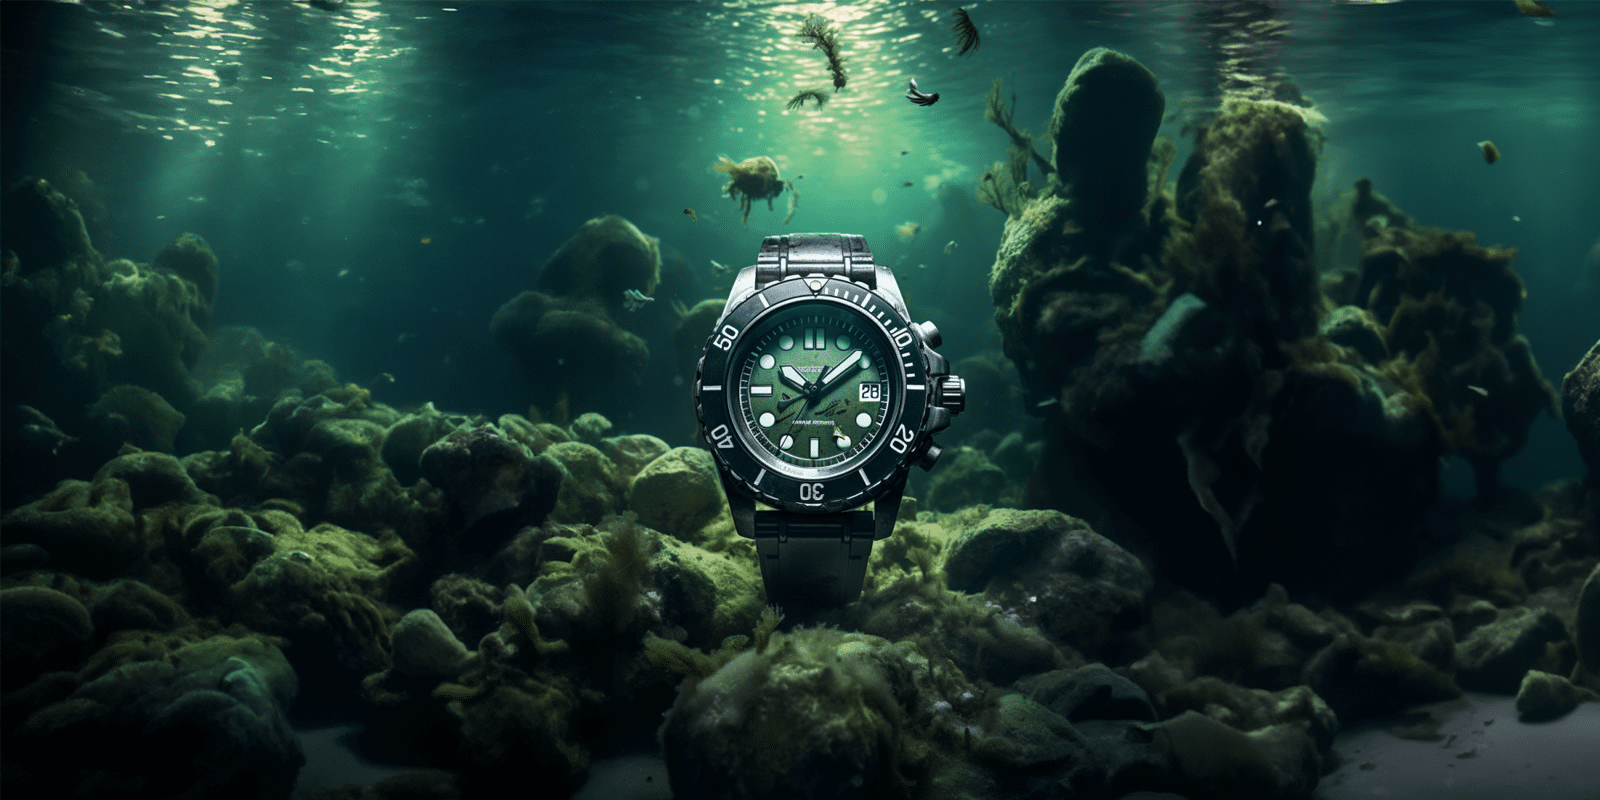 My Jewelry Repair An In Depth Look at Dive Watches Feature Image